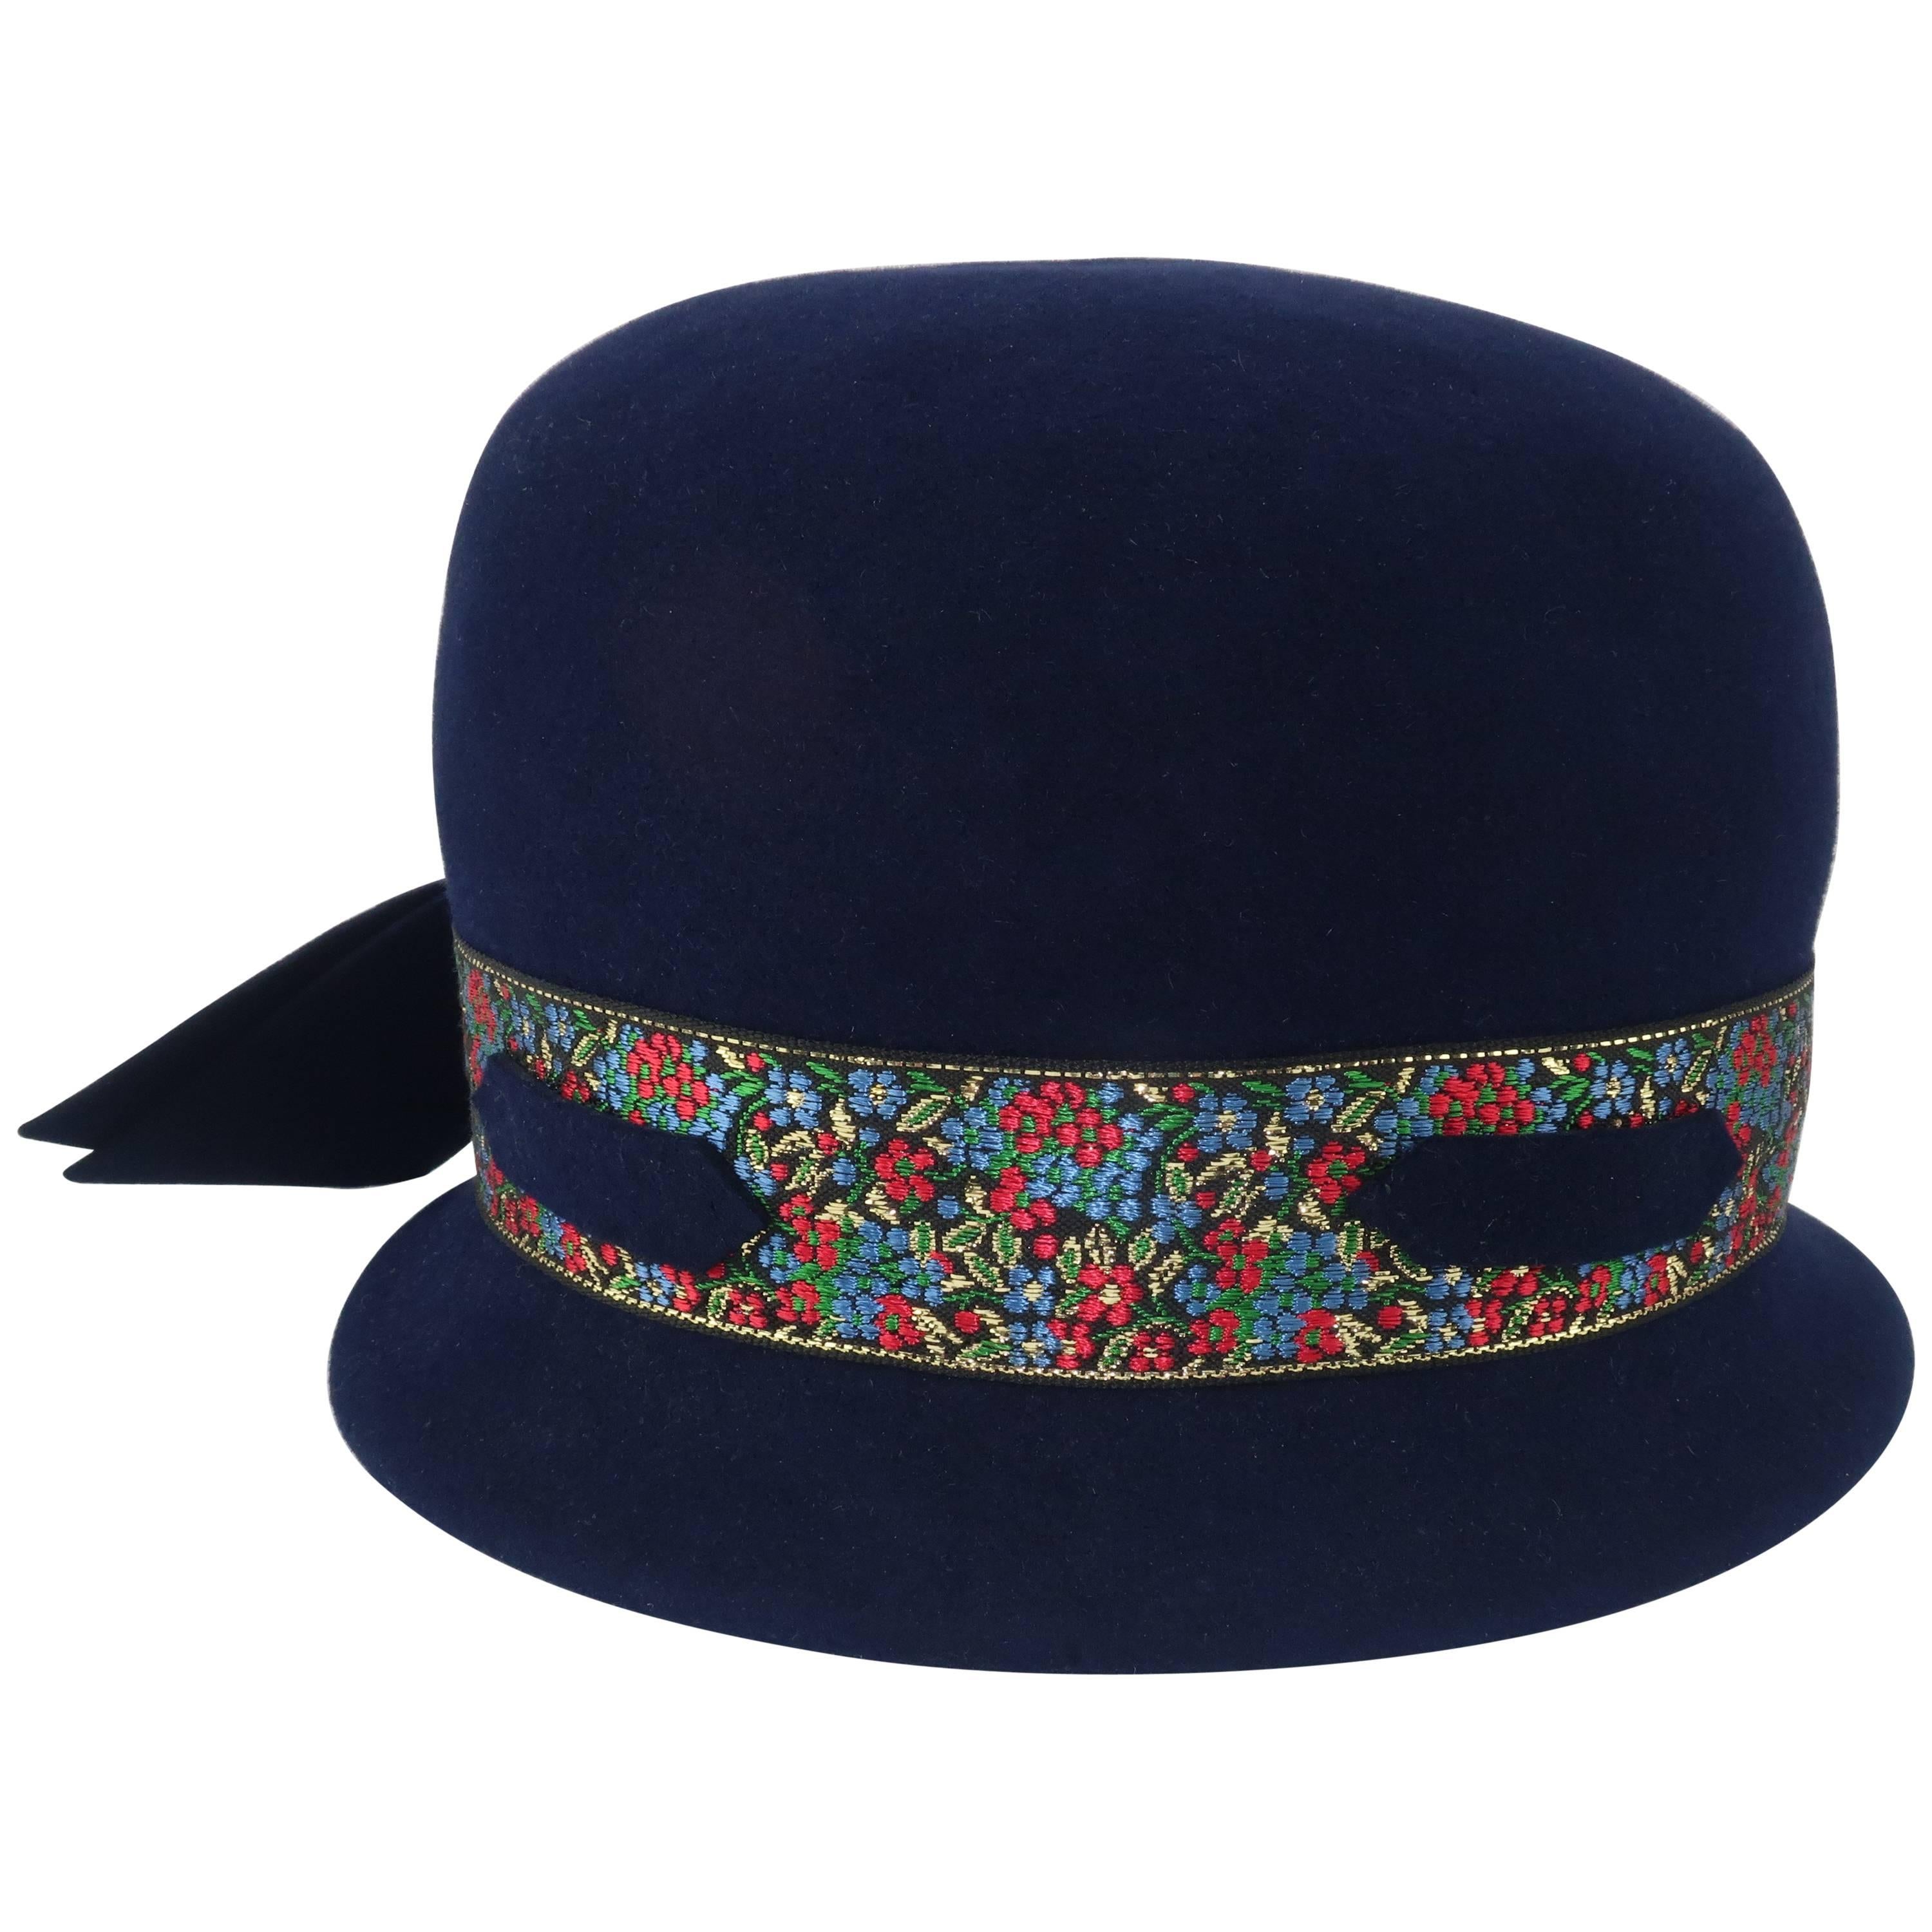 C.1960 Blue Wool Modified Bowler Hat With Brocade Trim